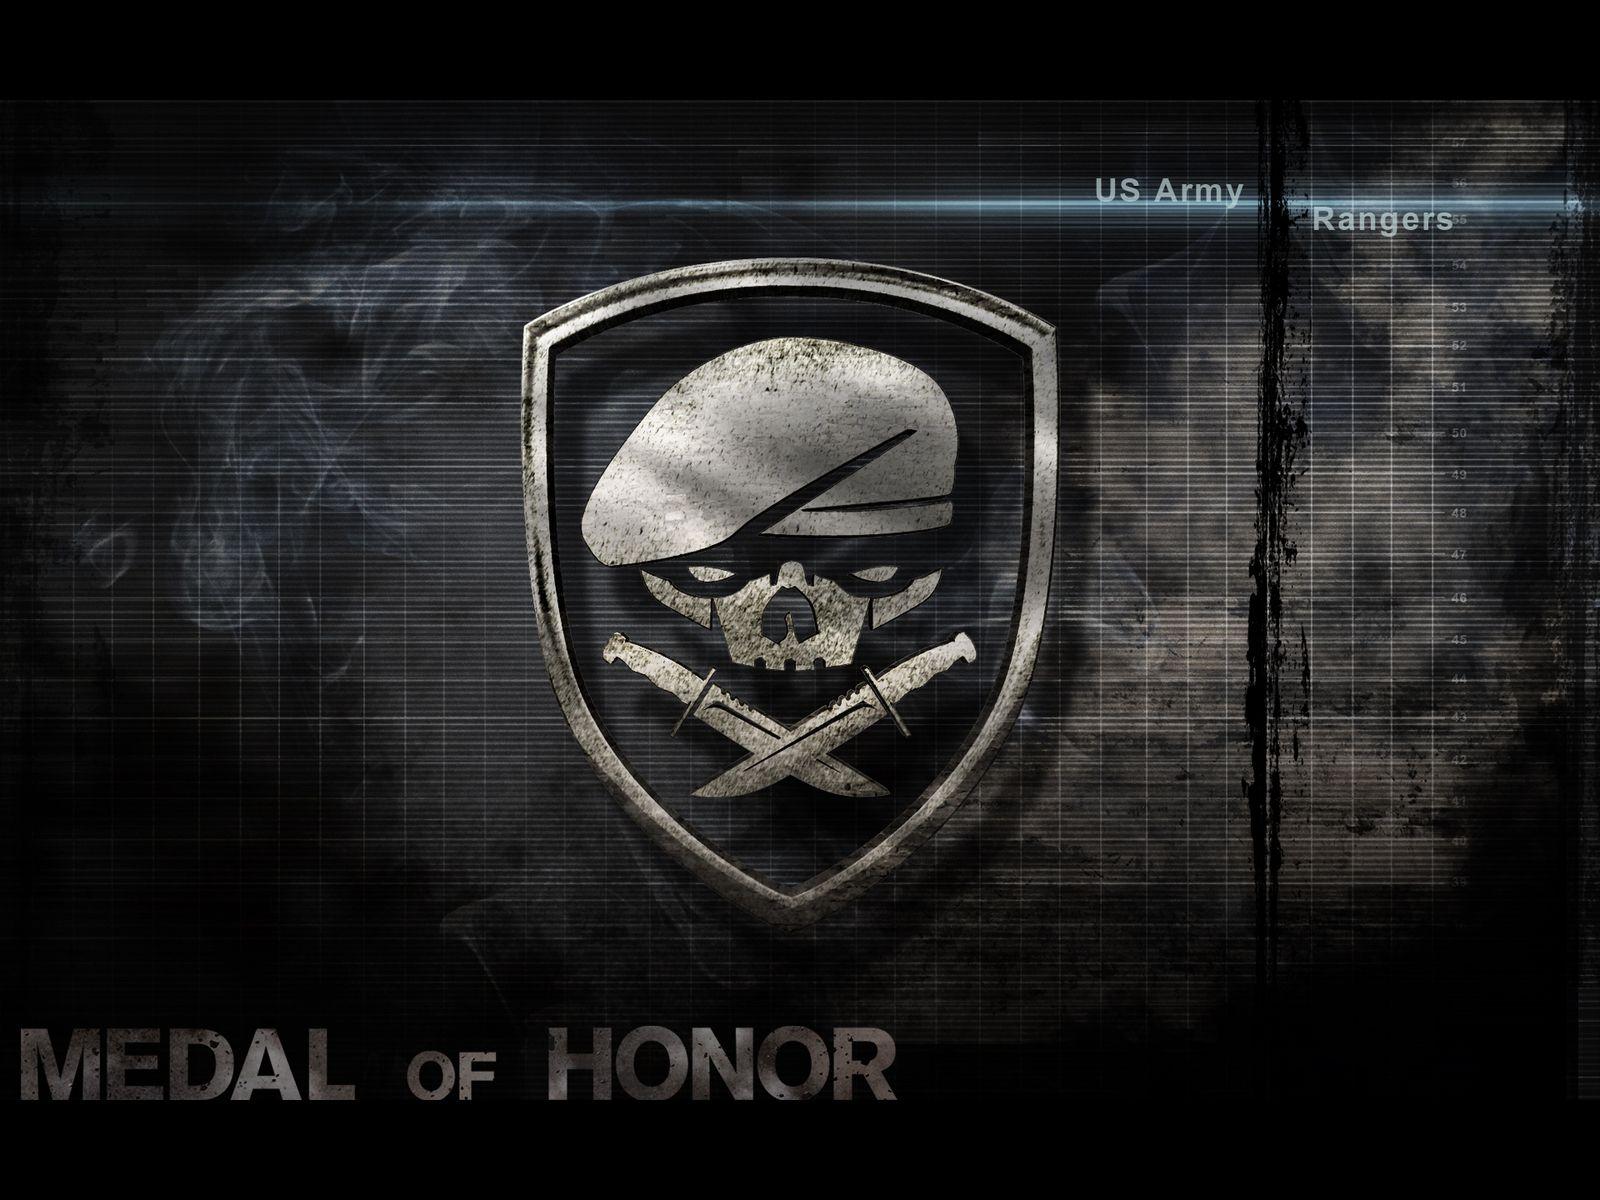 Us Army Rangers Medal Of Honor Wallpaper. Us army rangers, Medal of honor, Army rangers